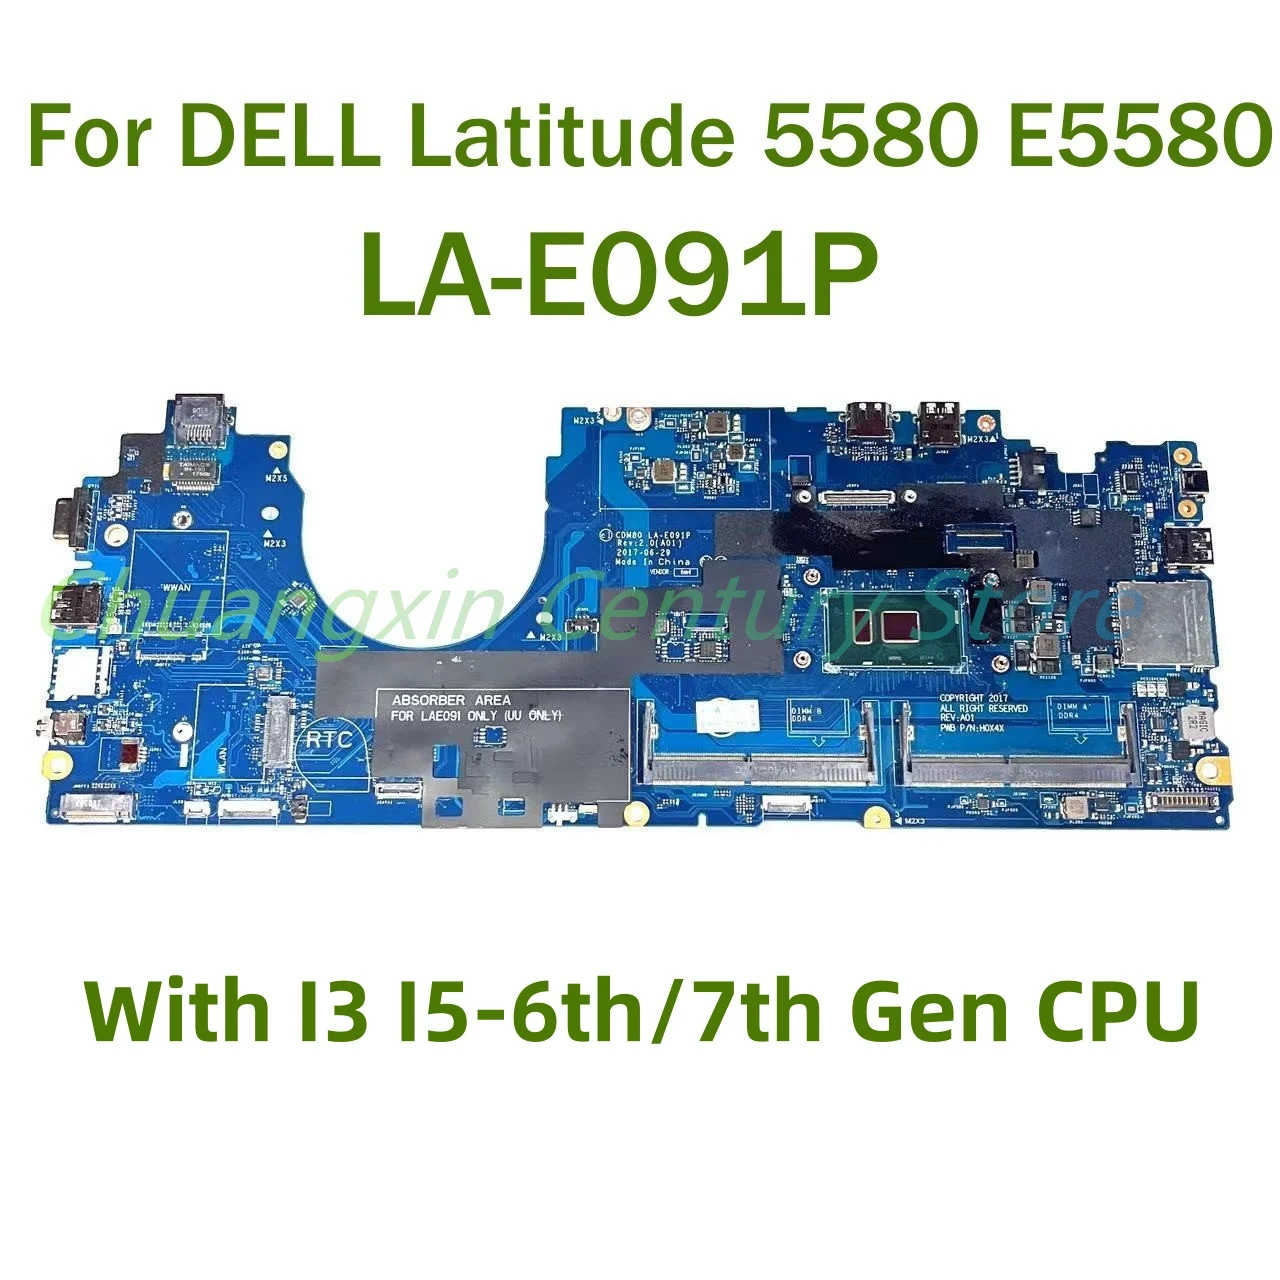 

For DELL Latitude 5580 E5580 Laptop motherboard LA-E091P with I3 I5-6th/7th Gen CPU 100% Tested Fully Work